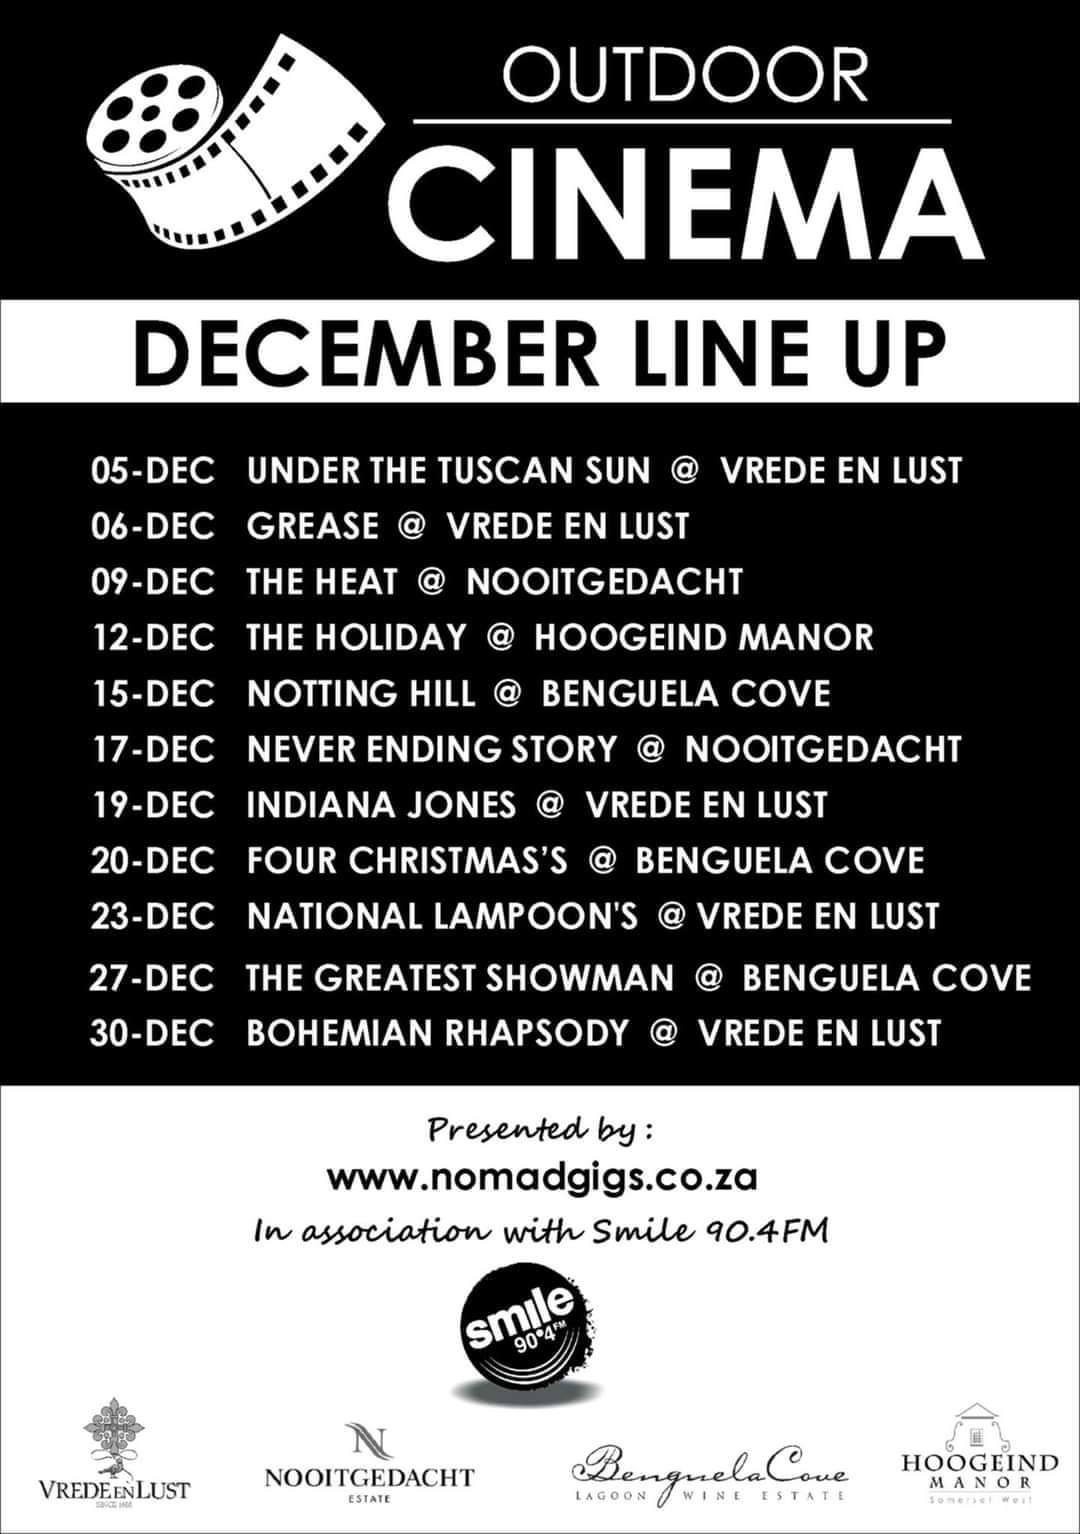 Outdoor Cinema over the festive season - Nomad Gigs with Smile 90.4FM - outdoor cinema at Benguela Cove winery, Hermanus - Tickets at www.nomadgigs.co.za/outdoor-cinema/